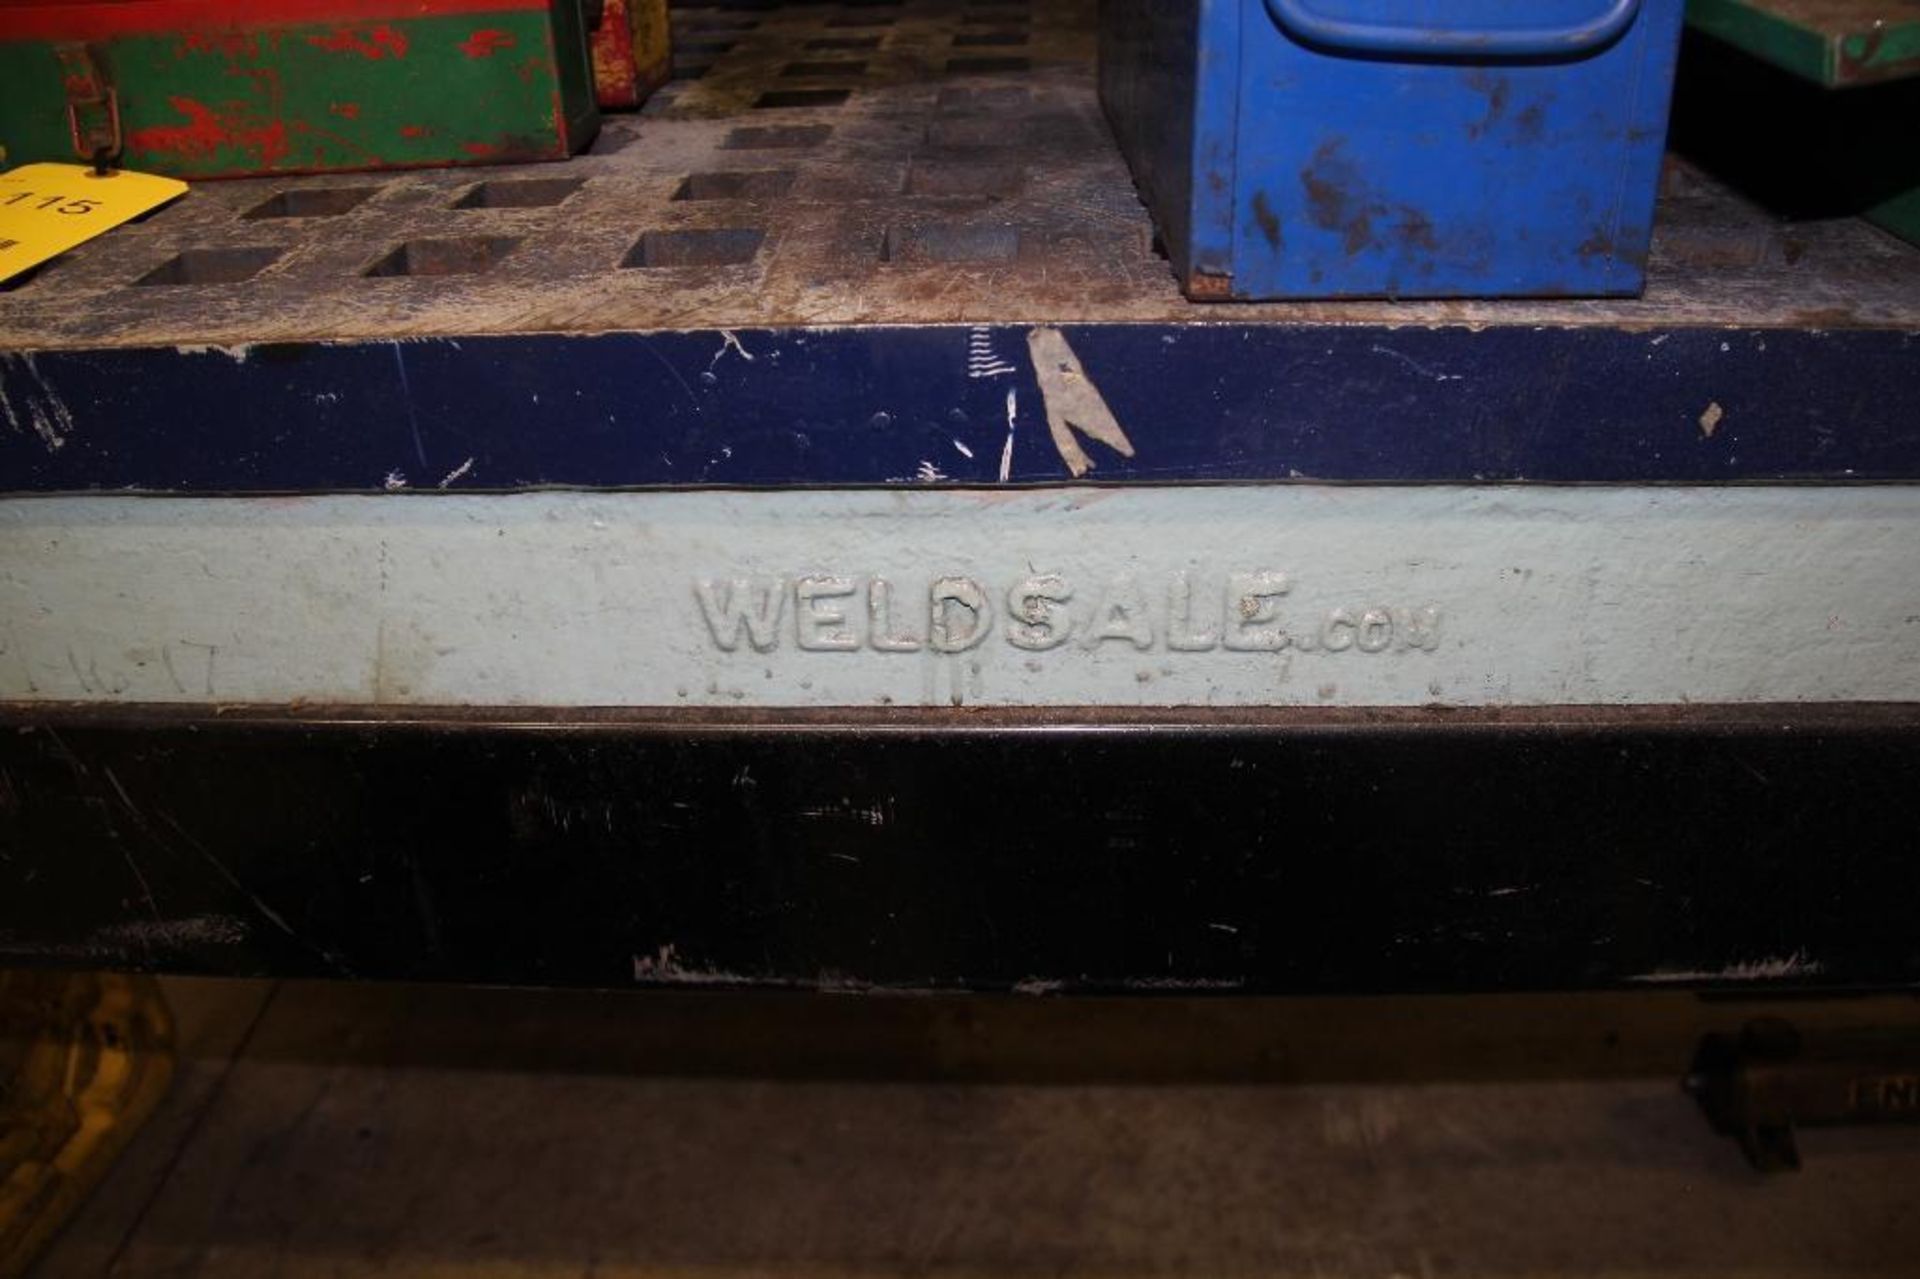 Weldsale 5 ft. x 5 ft. x 32 in. High Welding Table (SALE SUBJECT TO SECURED LENDER'S APPROVAL)